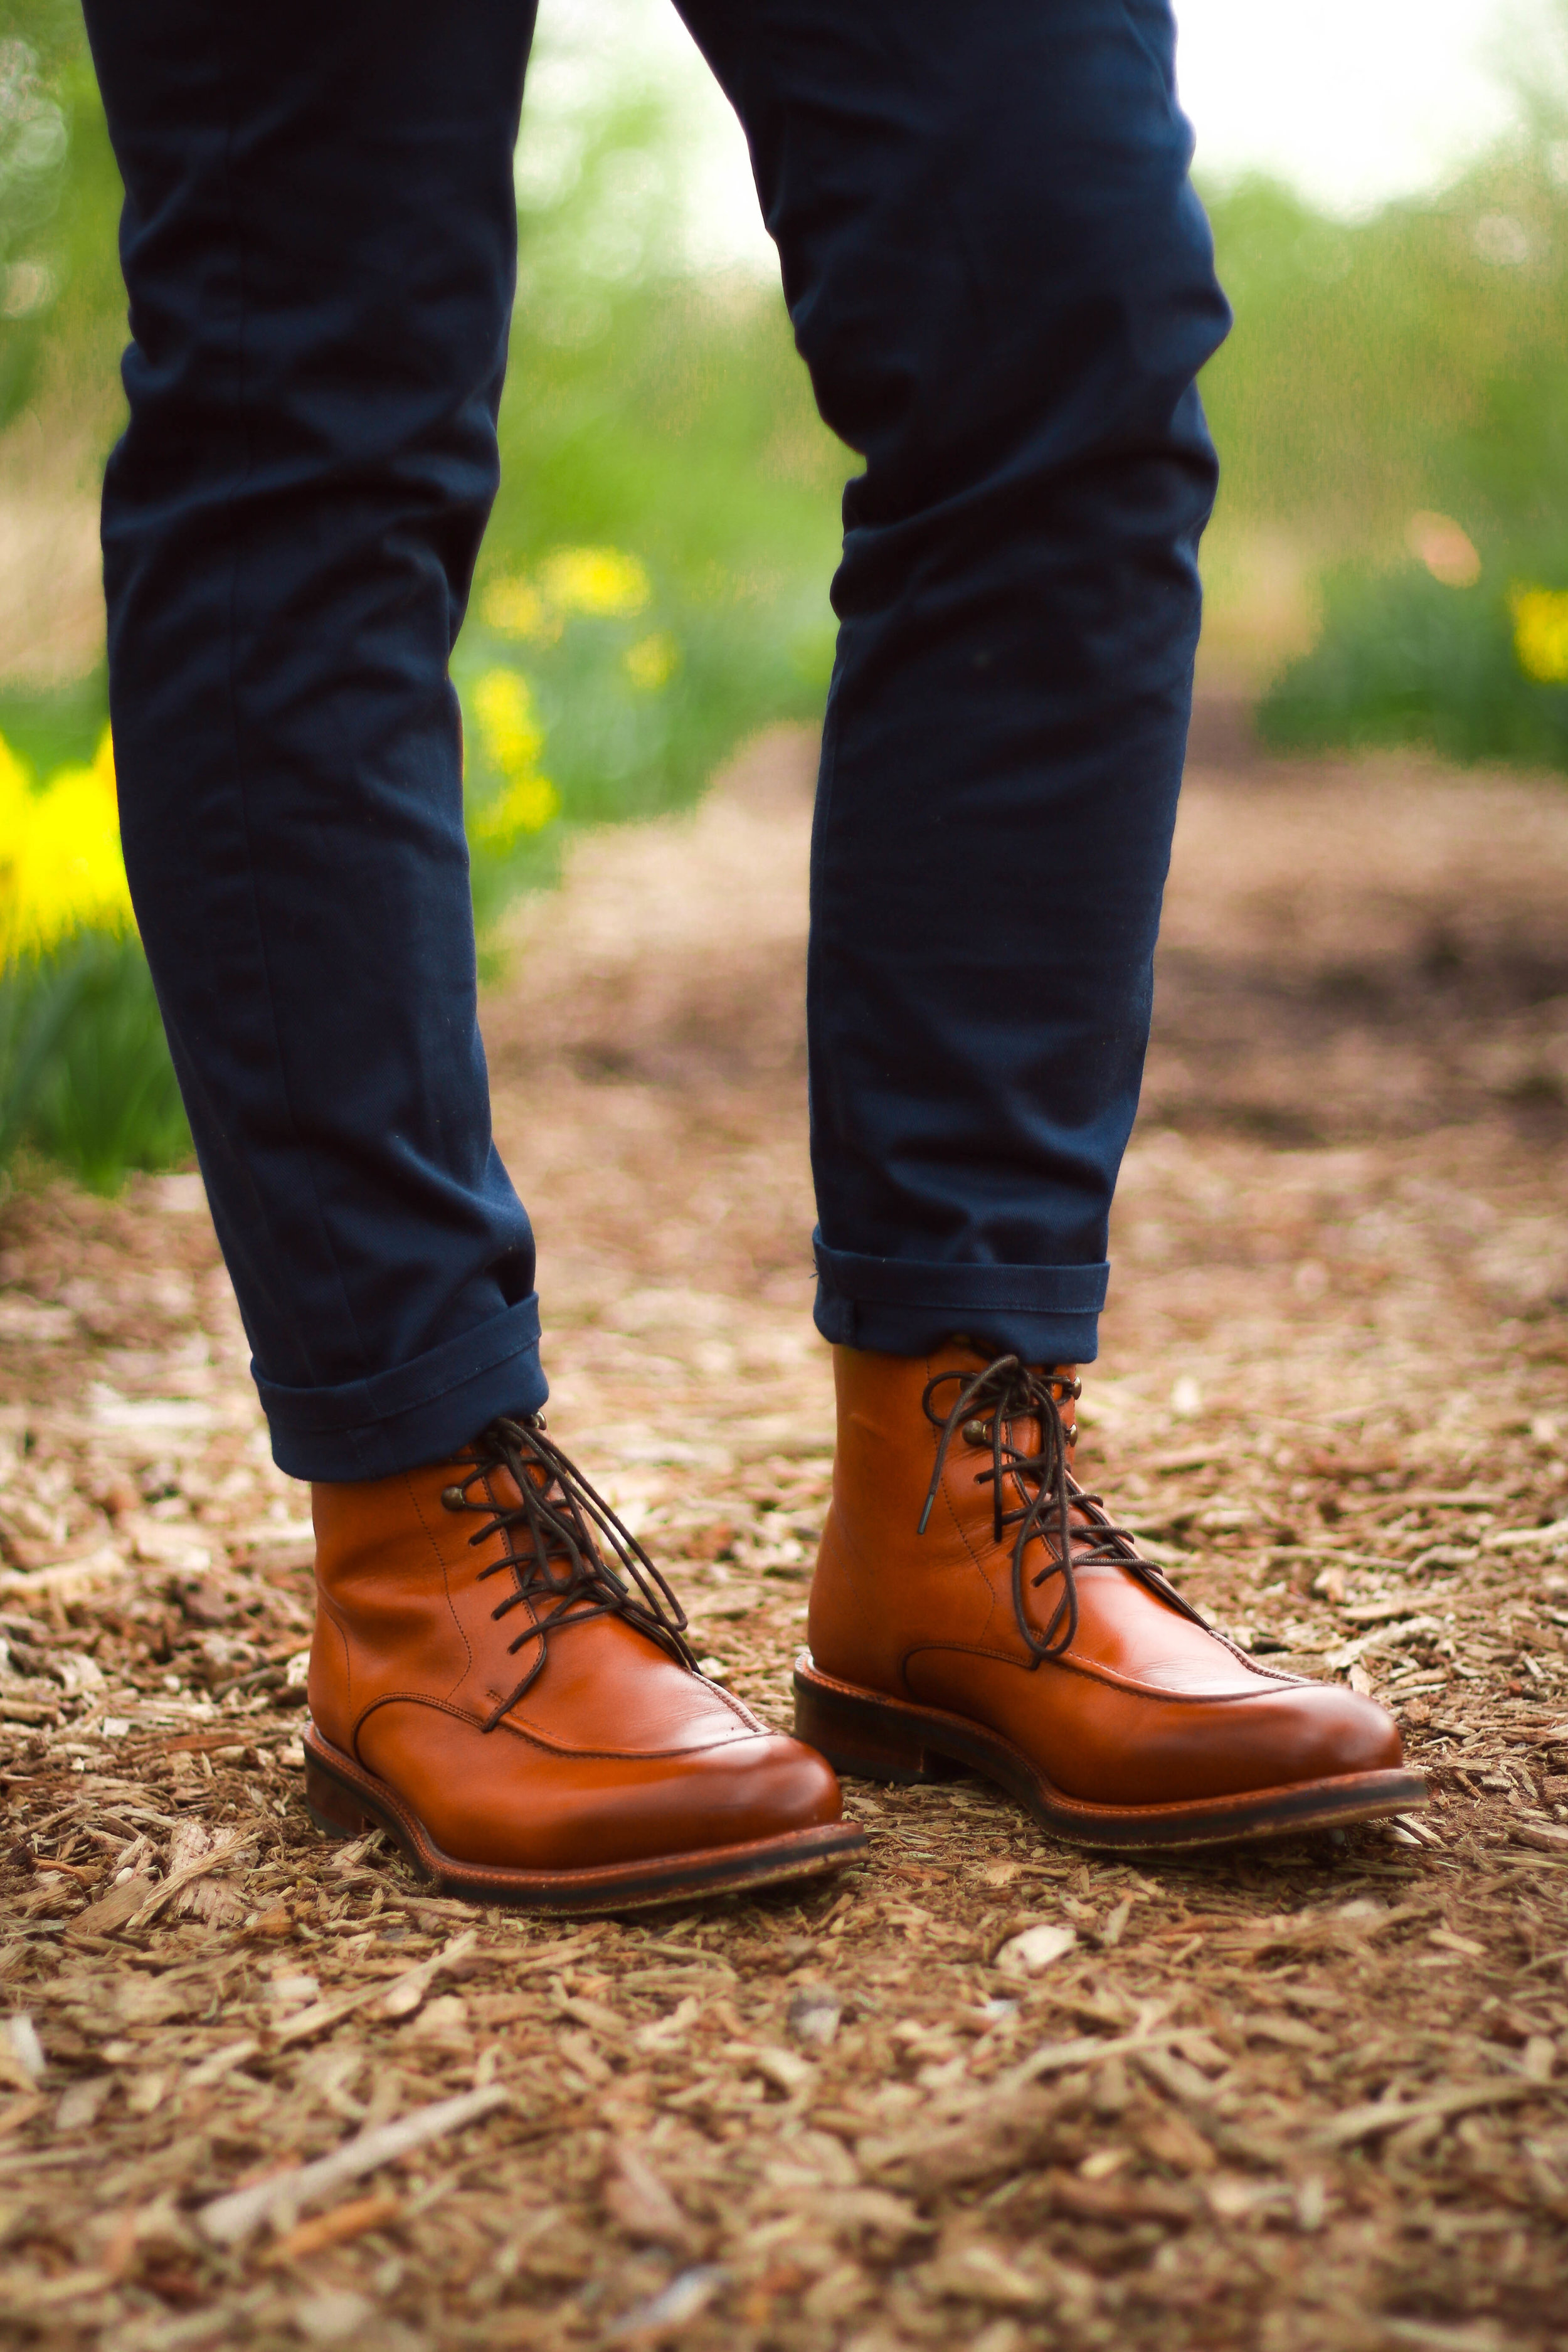 The Dress Boot to Buy if You are a Rugged Guy — The Mensch